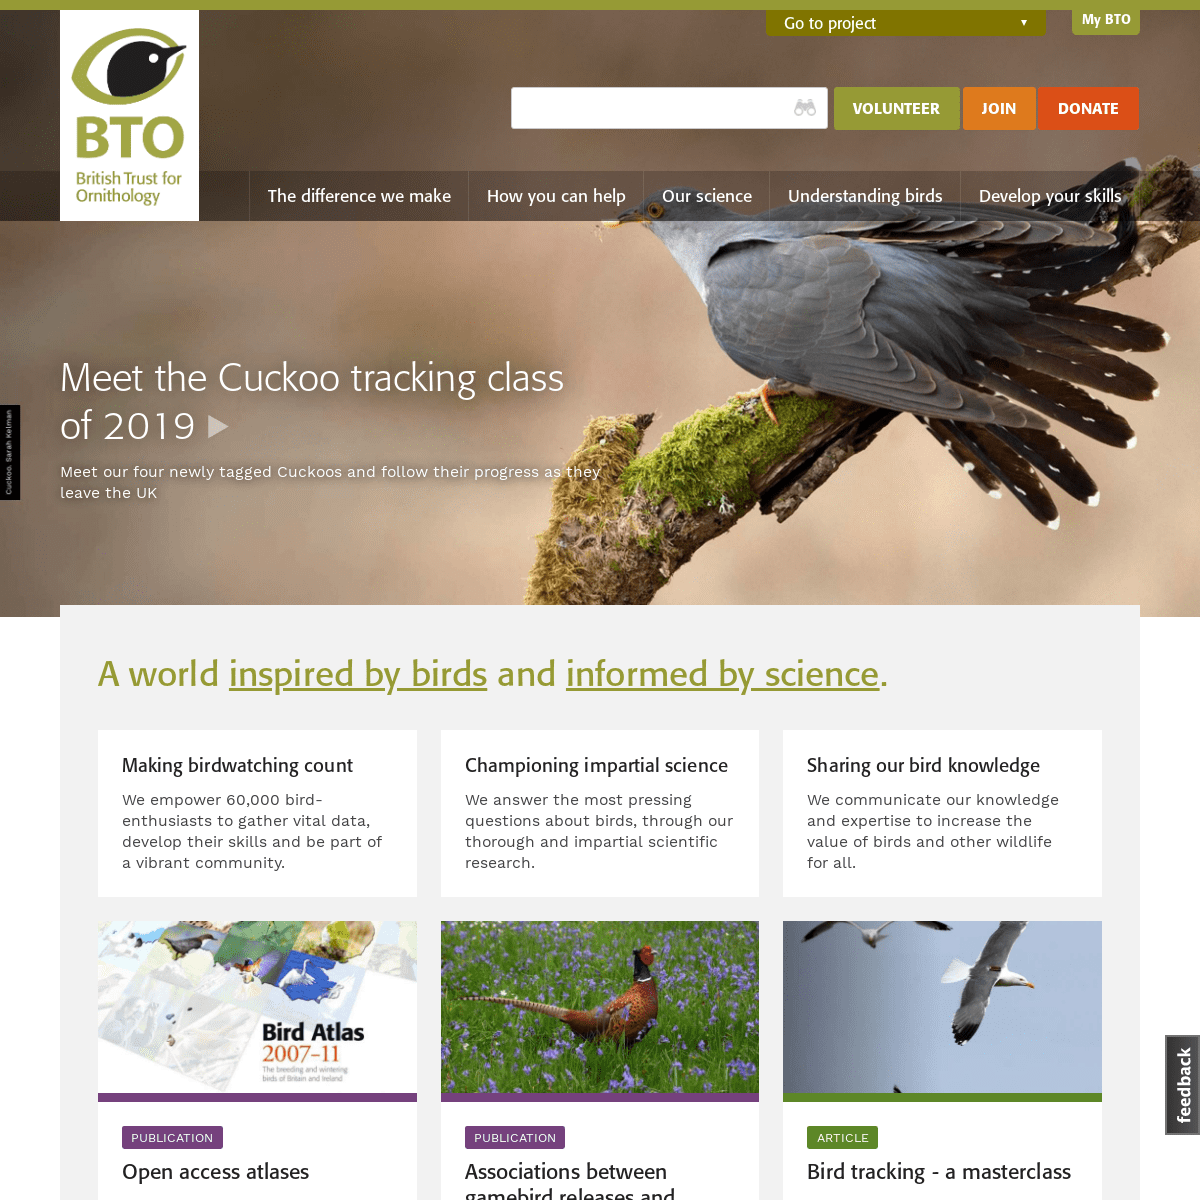 Welcome to the British Trust for Ornithology | BTO - British Trust for Ornithology